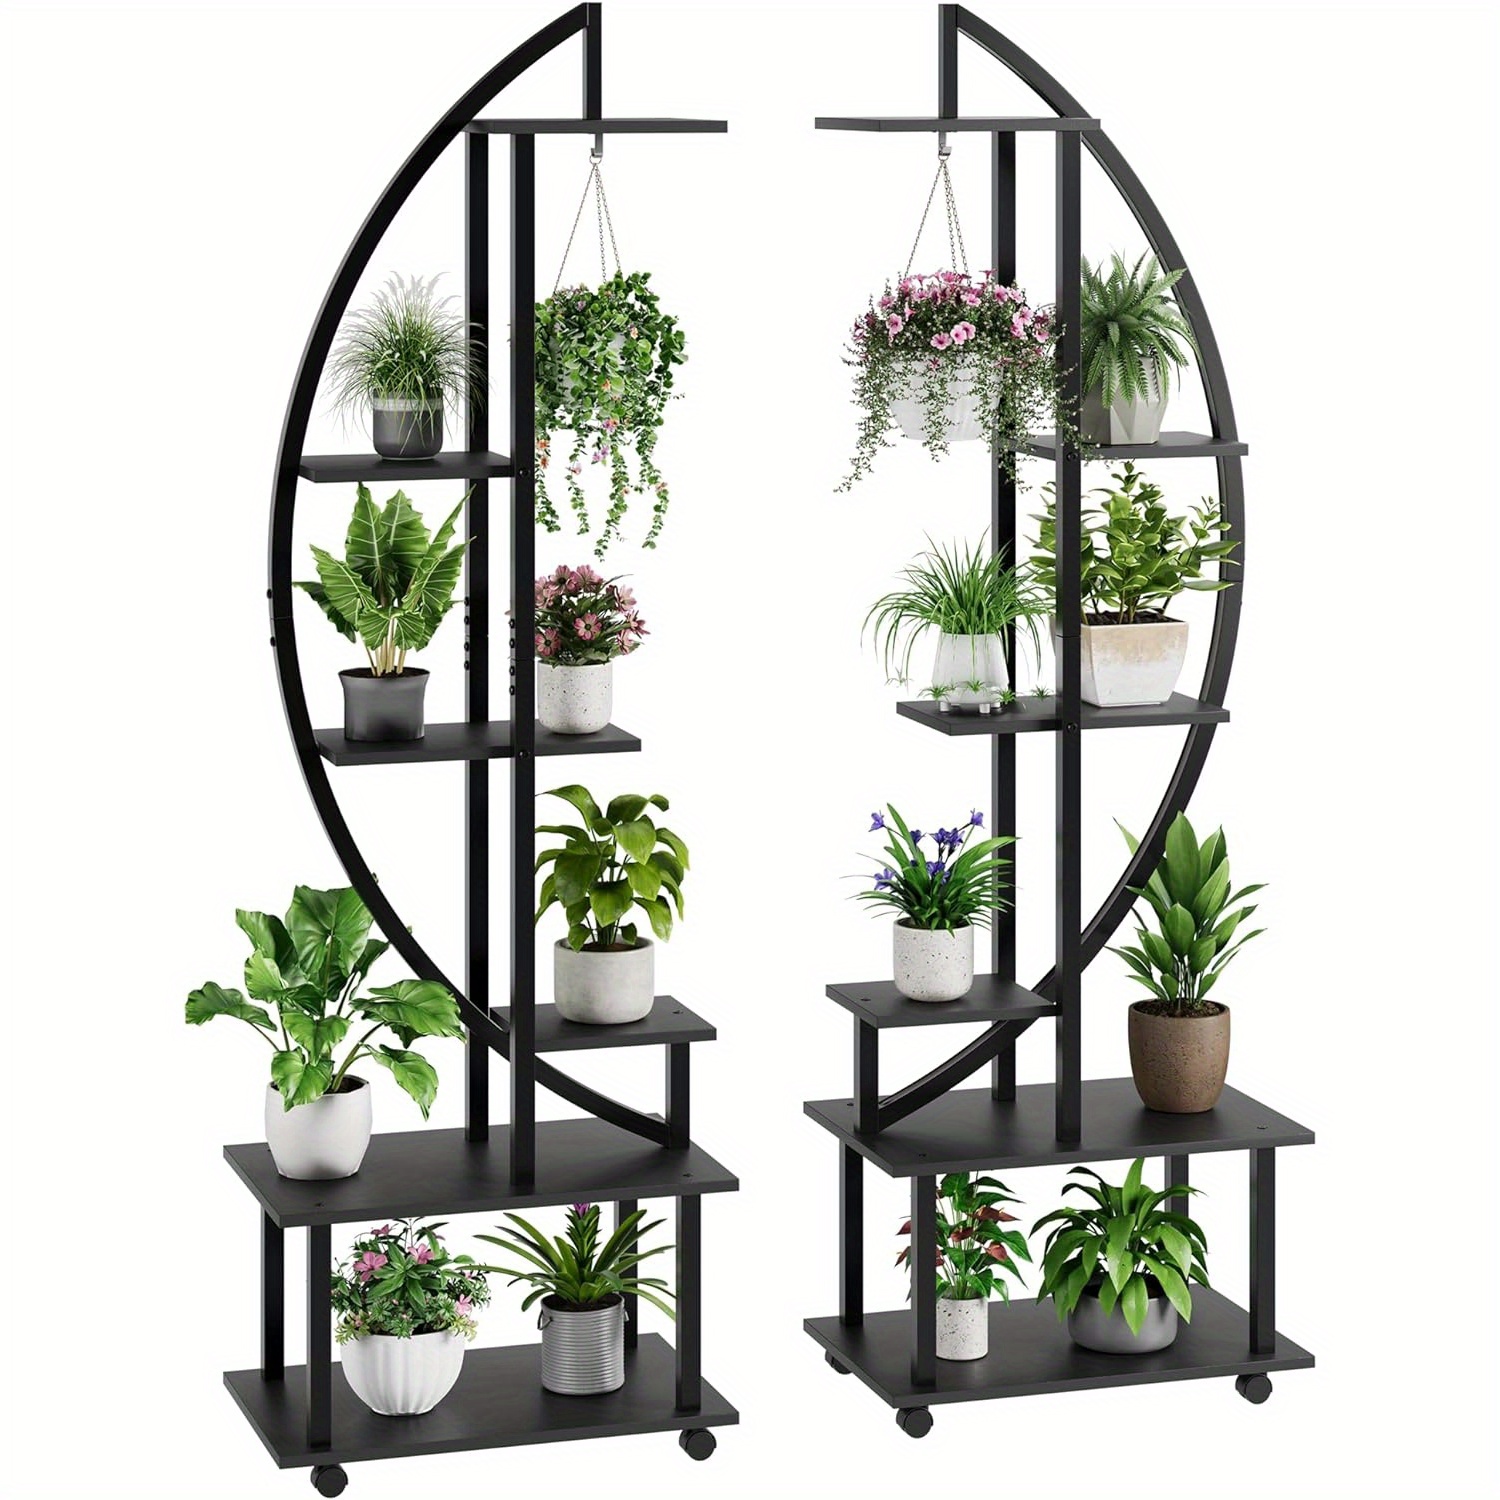 

Hufy 6 Tier Tall Plant Stand Metal Indoor Plant Stand With Detachable Wheels Half Moon Shape Plant Stands With Drawers Plant Shelf Rack For Home For Patio Lawn Garden Balcony, 2 Pack, Black